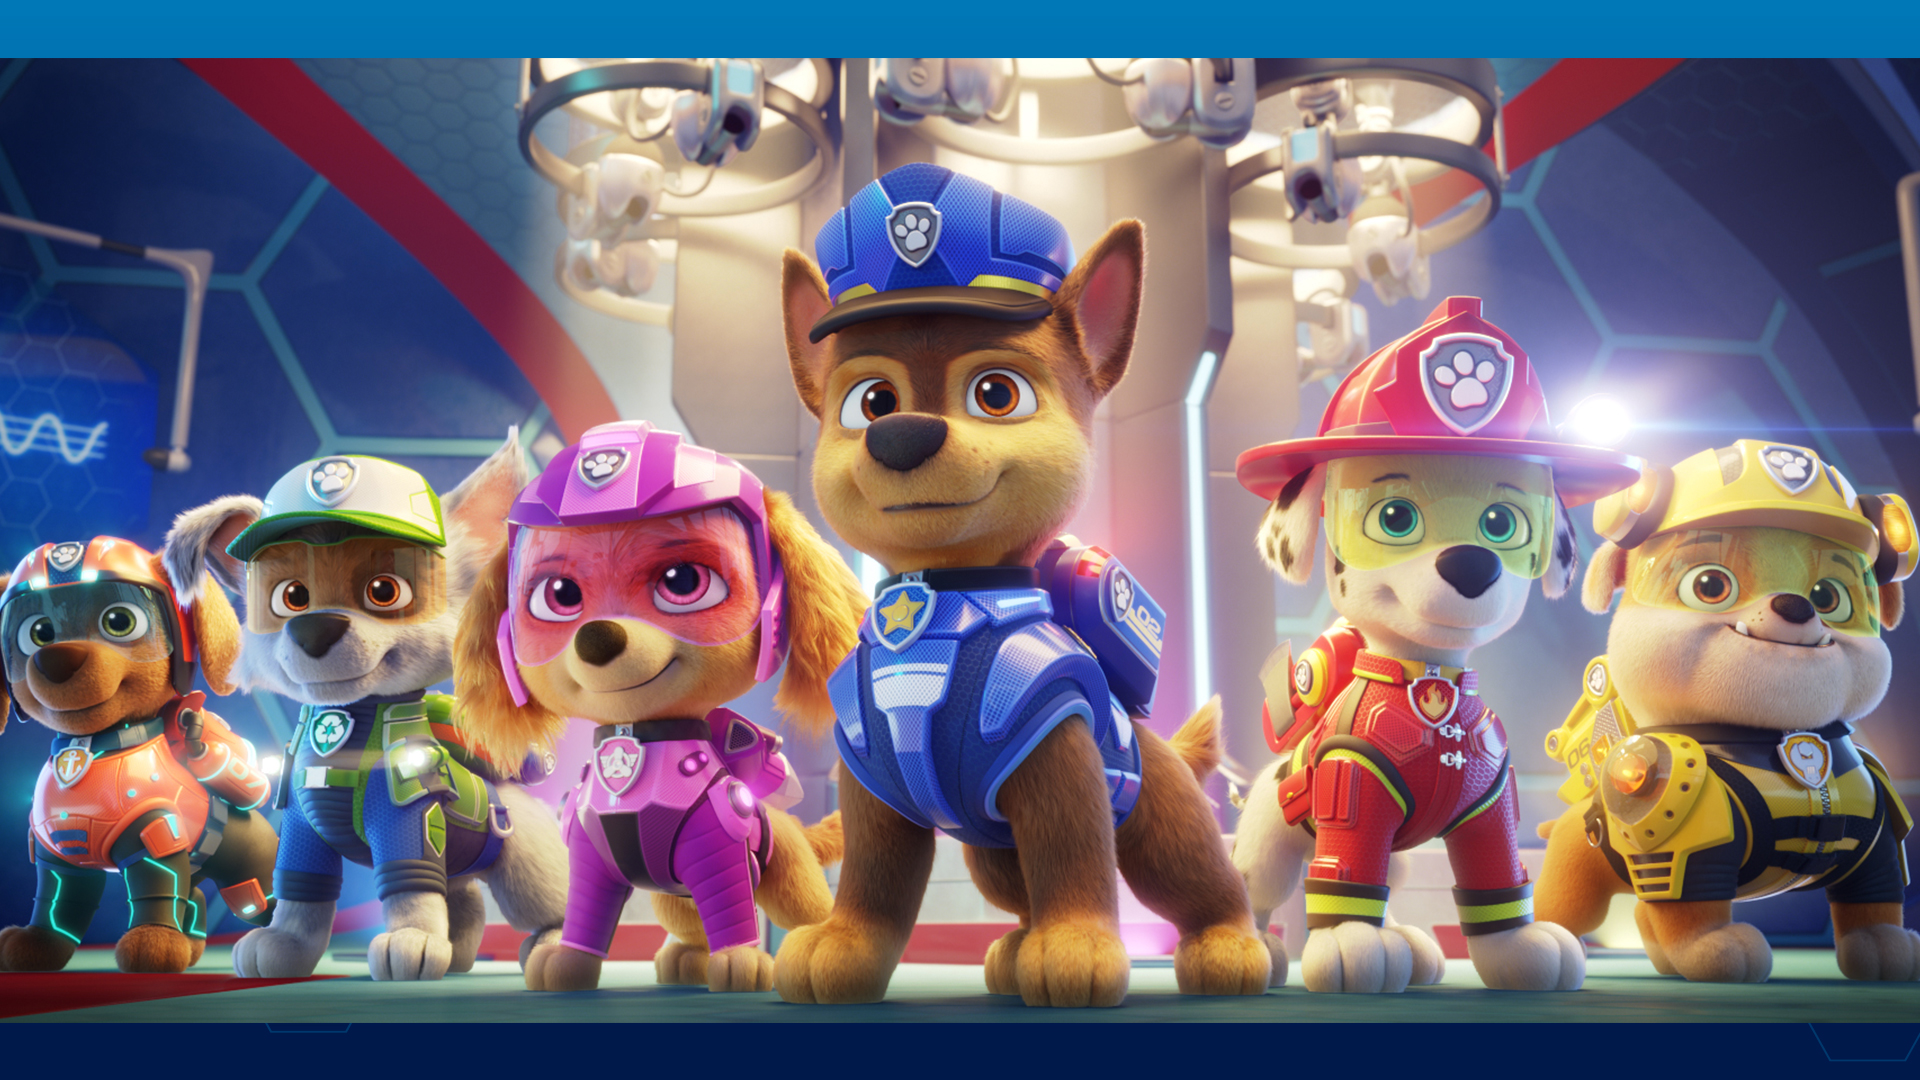 PAW Patrol on Twitter: "The pups are on a roll and ready to make their big screen debut. PAW Patrol: Movie in theatres August 20. #PAWPatrolMovie https://t.co/E3HotXysZy" / Twitter